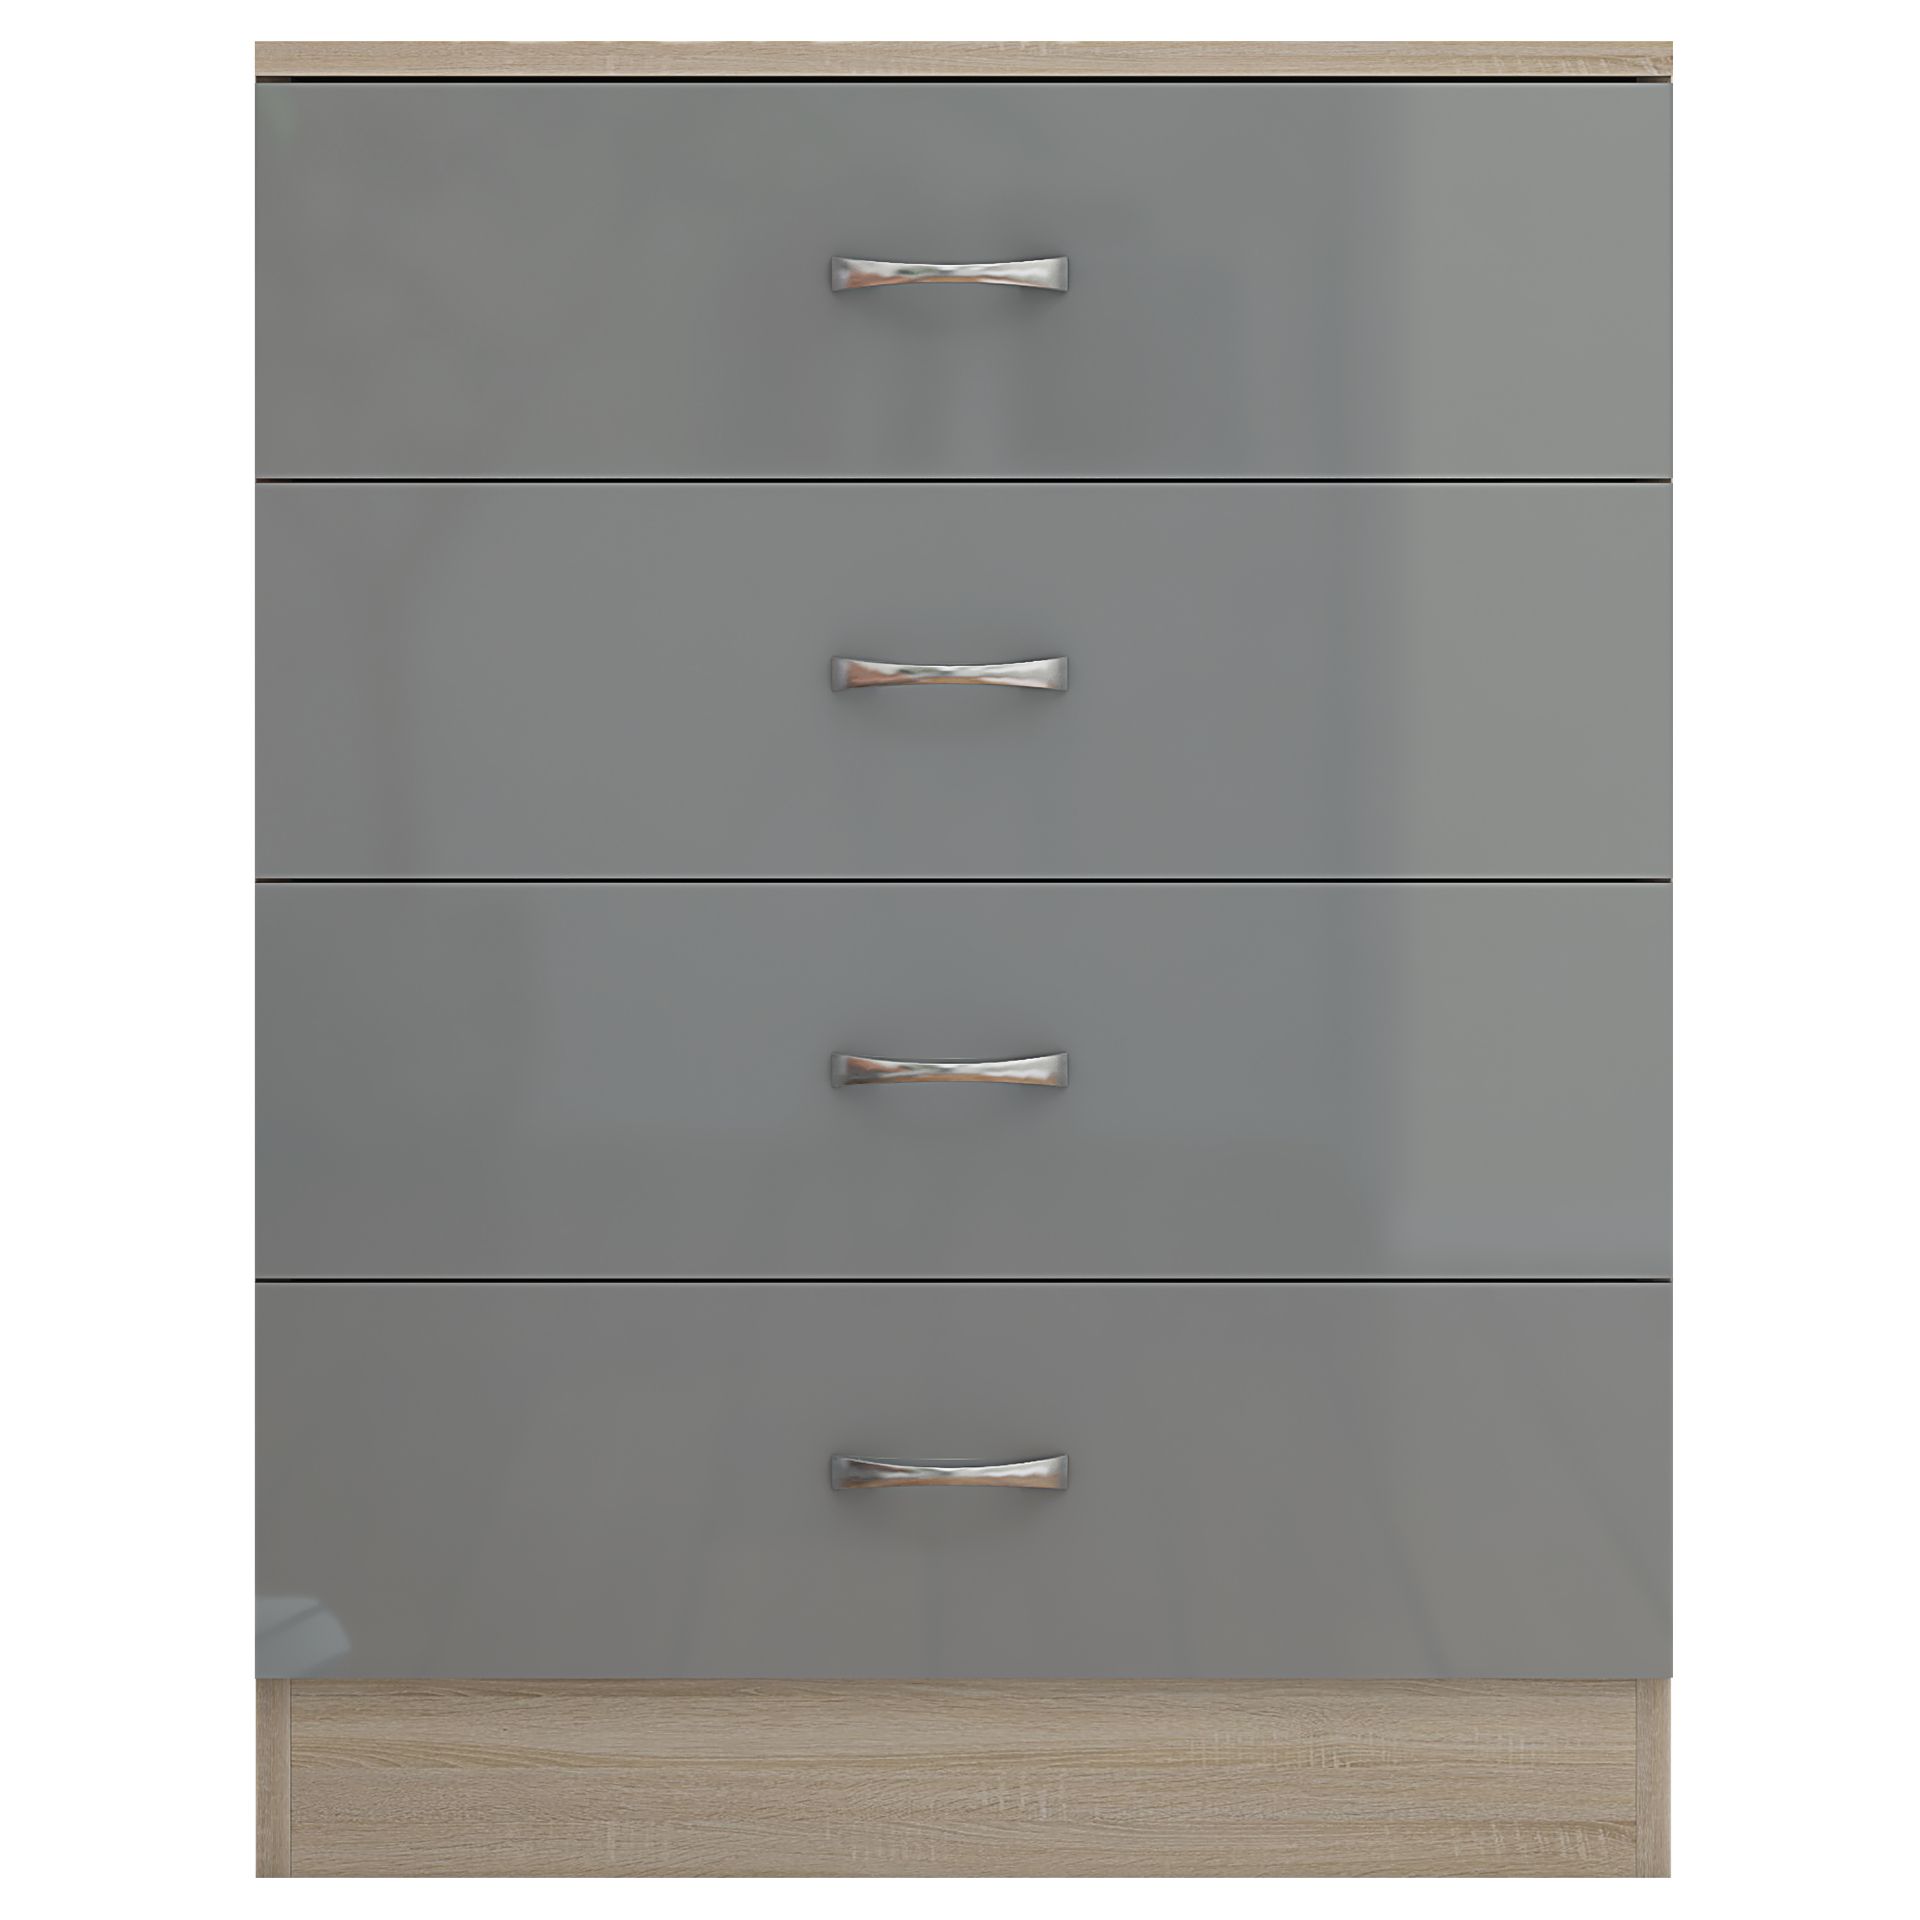 STUNNING CHEST OF DRAWERS X 2 - HIGH GLOSS GREY ON SONOMA OAK FRAME - Image 5 of 9